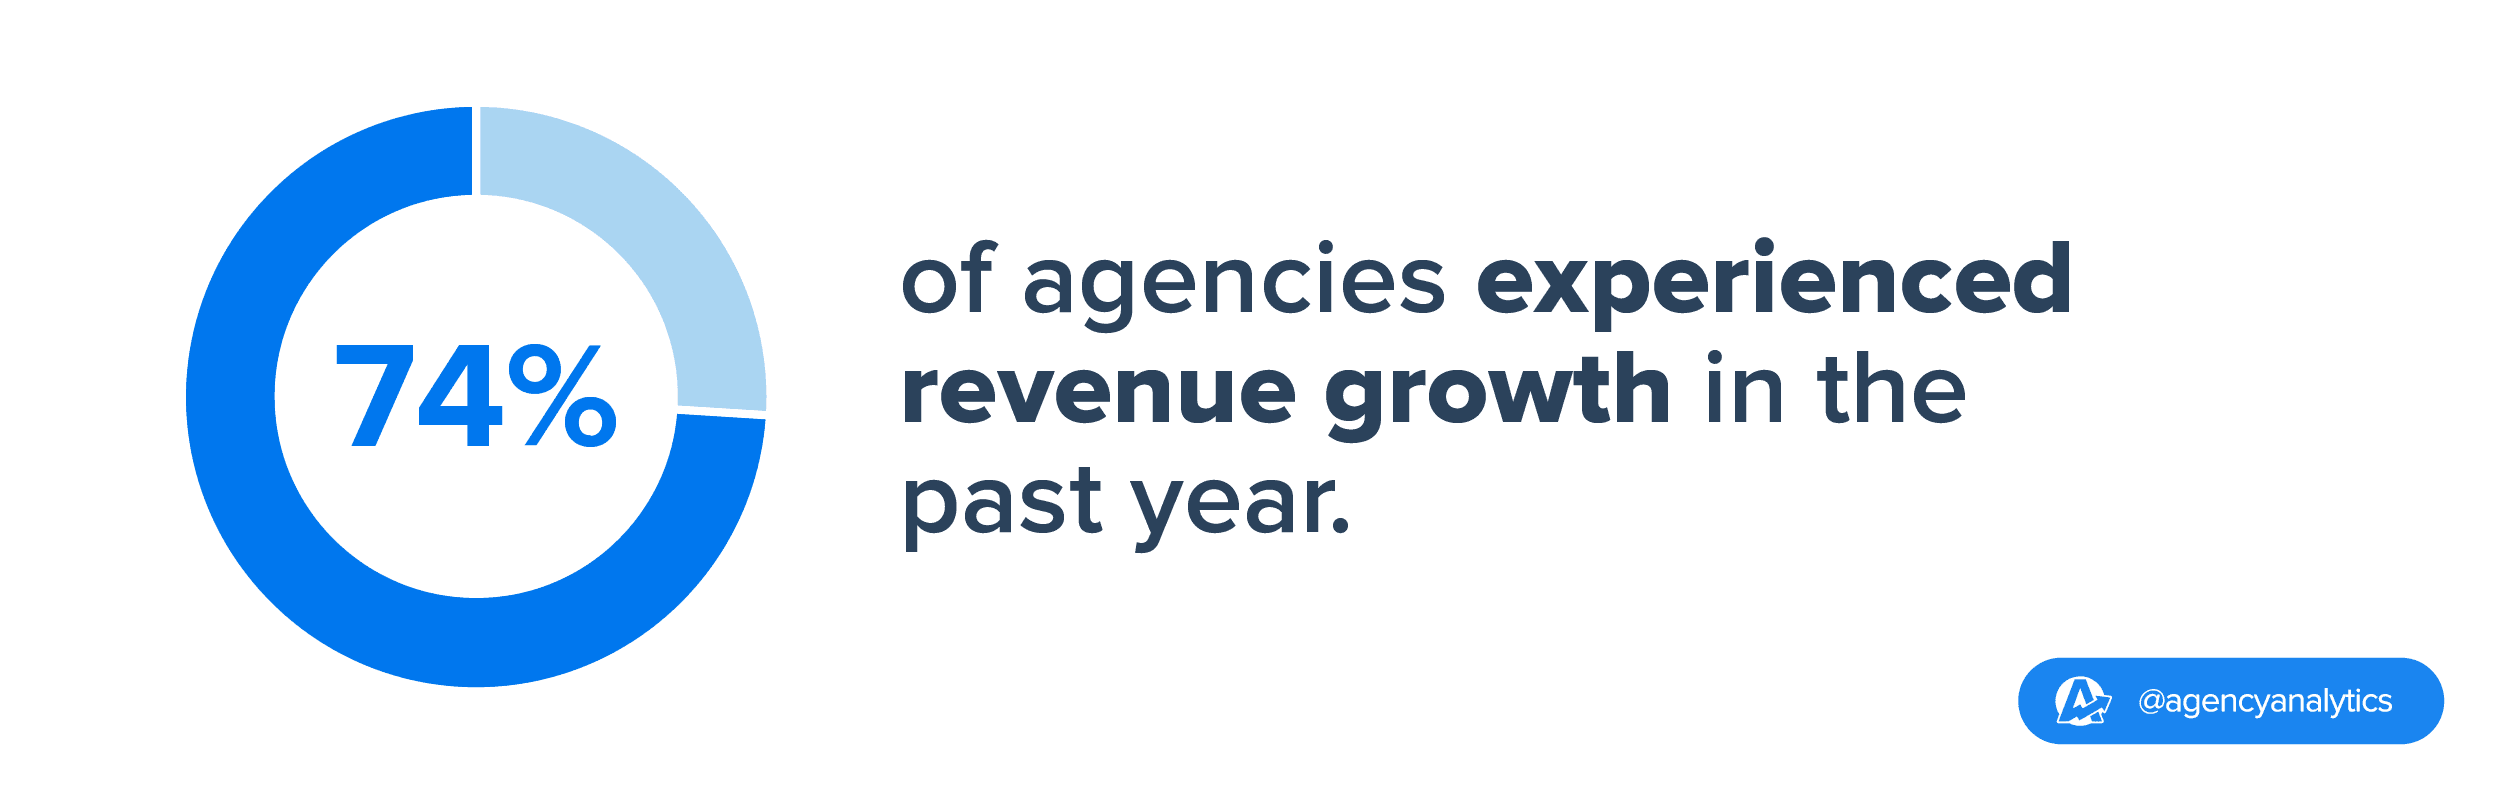 74% of marketing agencies had revenue growth in the past year